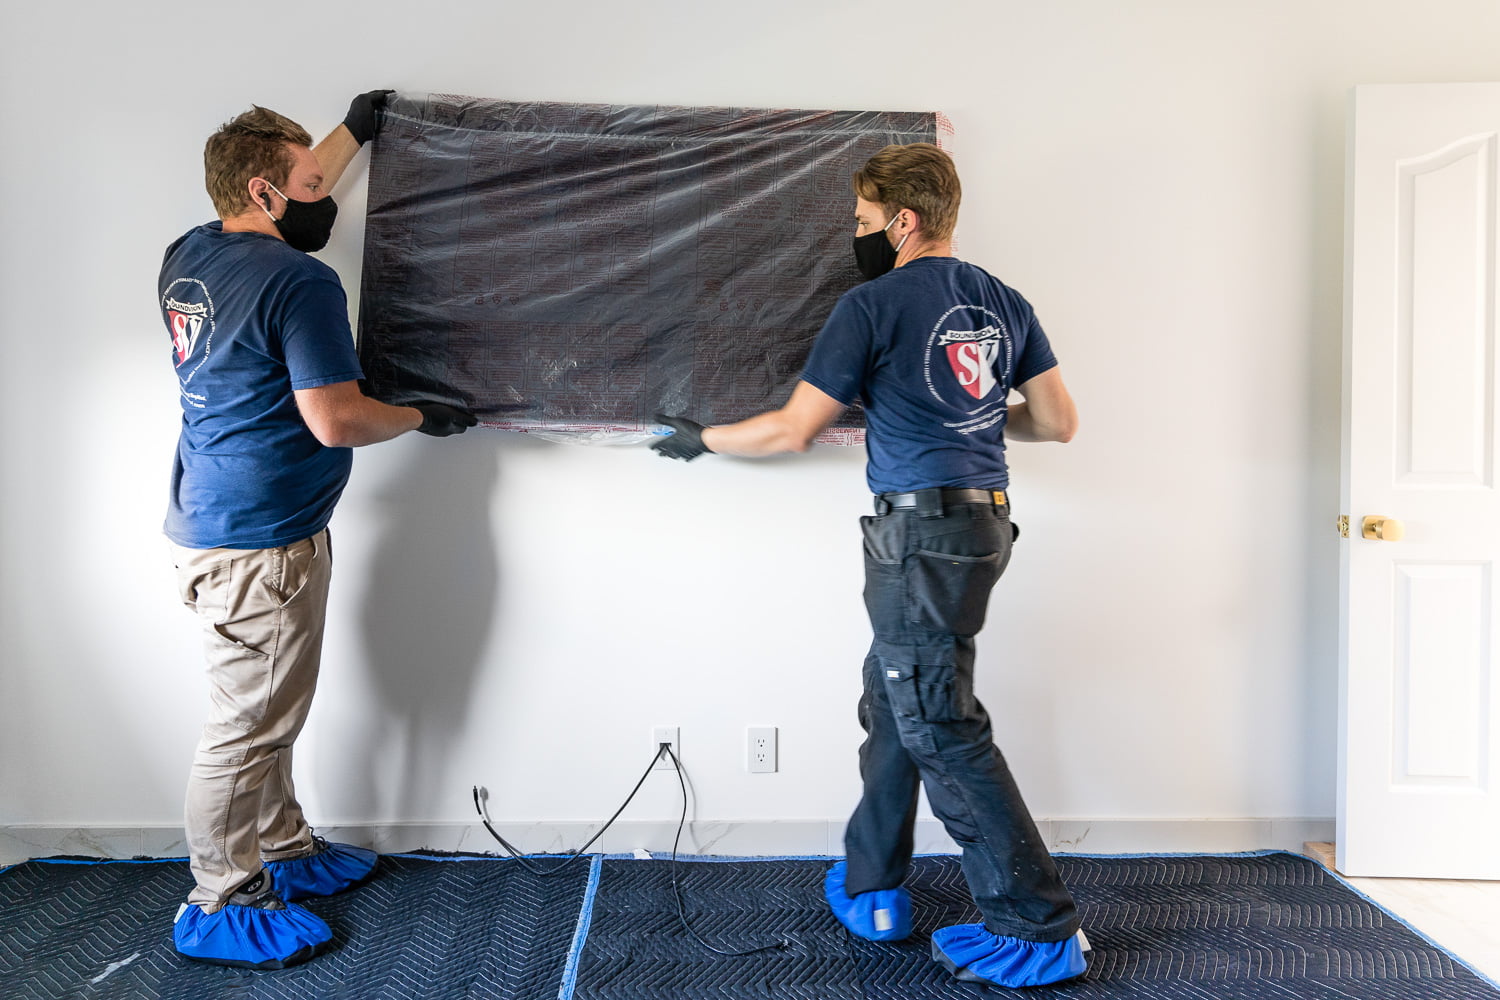 Two SoundVision technicians mounting a 4K TV on the wall